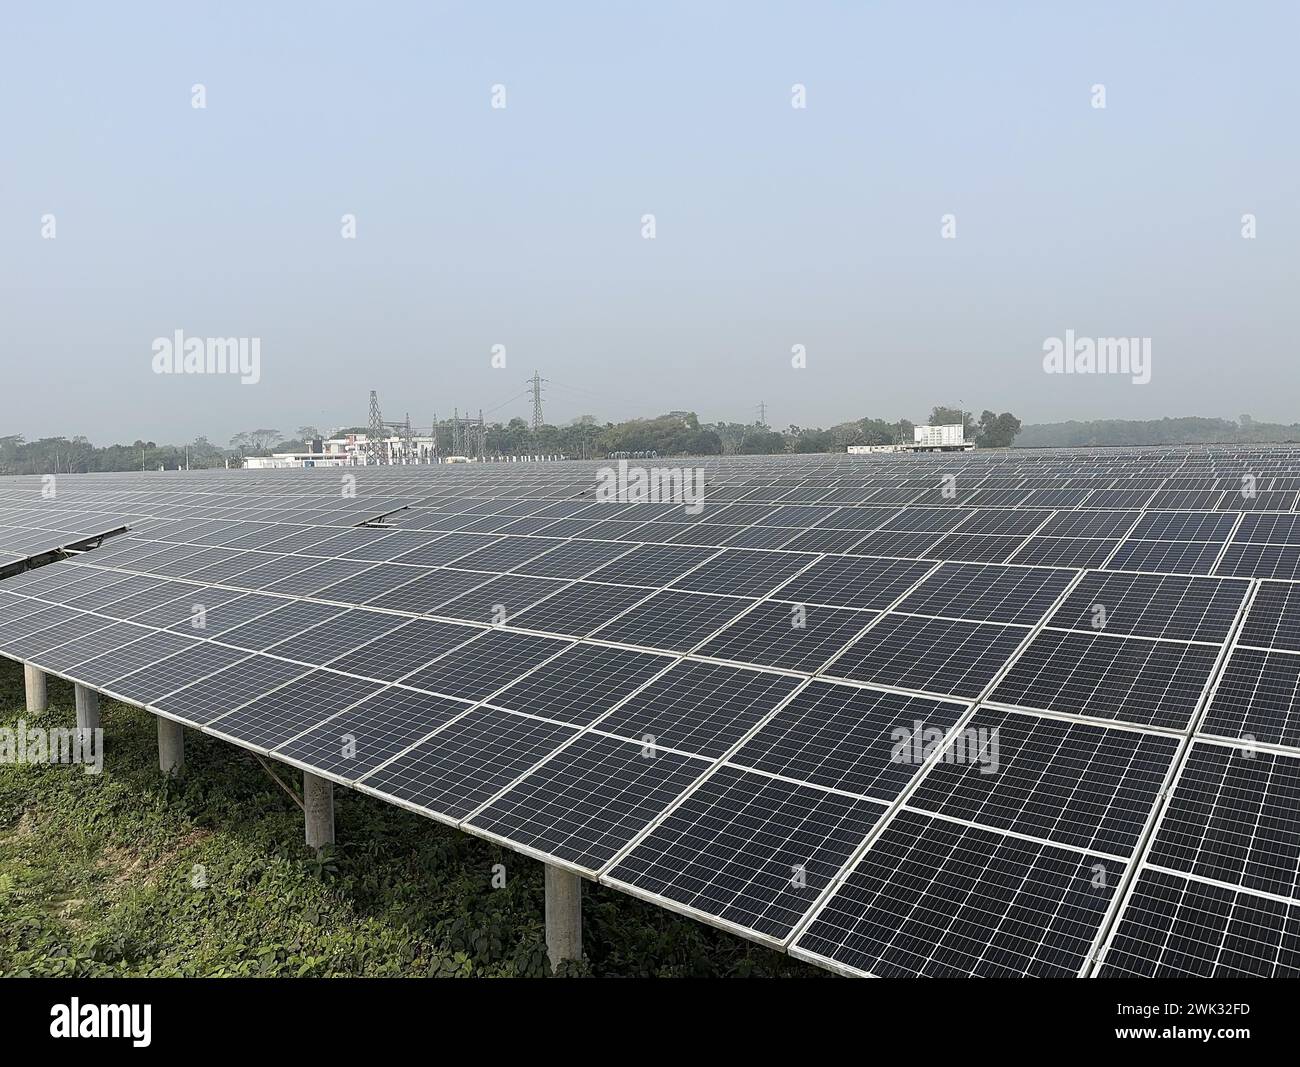 (240218) -- DHAKA, Feb. 18, 2024 (Xinhua) -- This photo taken on Feb. 17, 2024 shows a 50 MW Chinese-built photovoltaic power plant in Mymensingh District, Bangladesh. The Mymensingh district in north-central Bangladesh enjoys better sunshine than any other place in the South Asian country.The 50 MW photovoltaic power plant invested by HDFC SinPower Ltd. whose major shareholder is China Huadian Overseas Investment Co., Ltd. started construction in September 2019 to utilize the advantage of solar resources here. Overcoming difficulties during the construction, the project was put into commercia Stock Photo